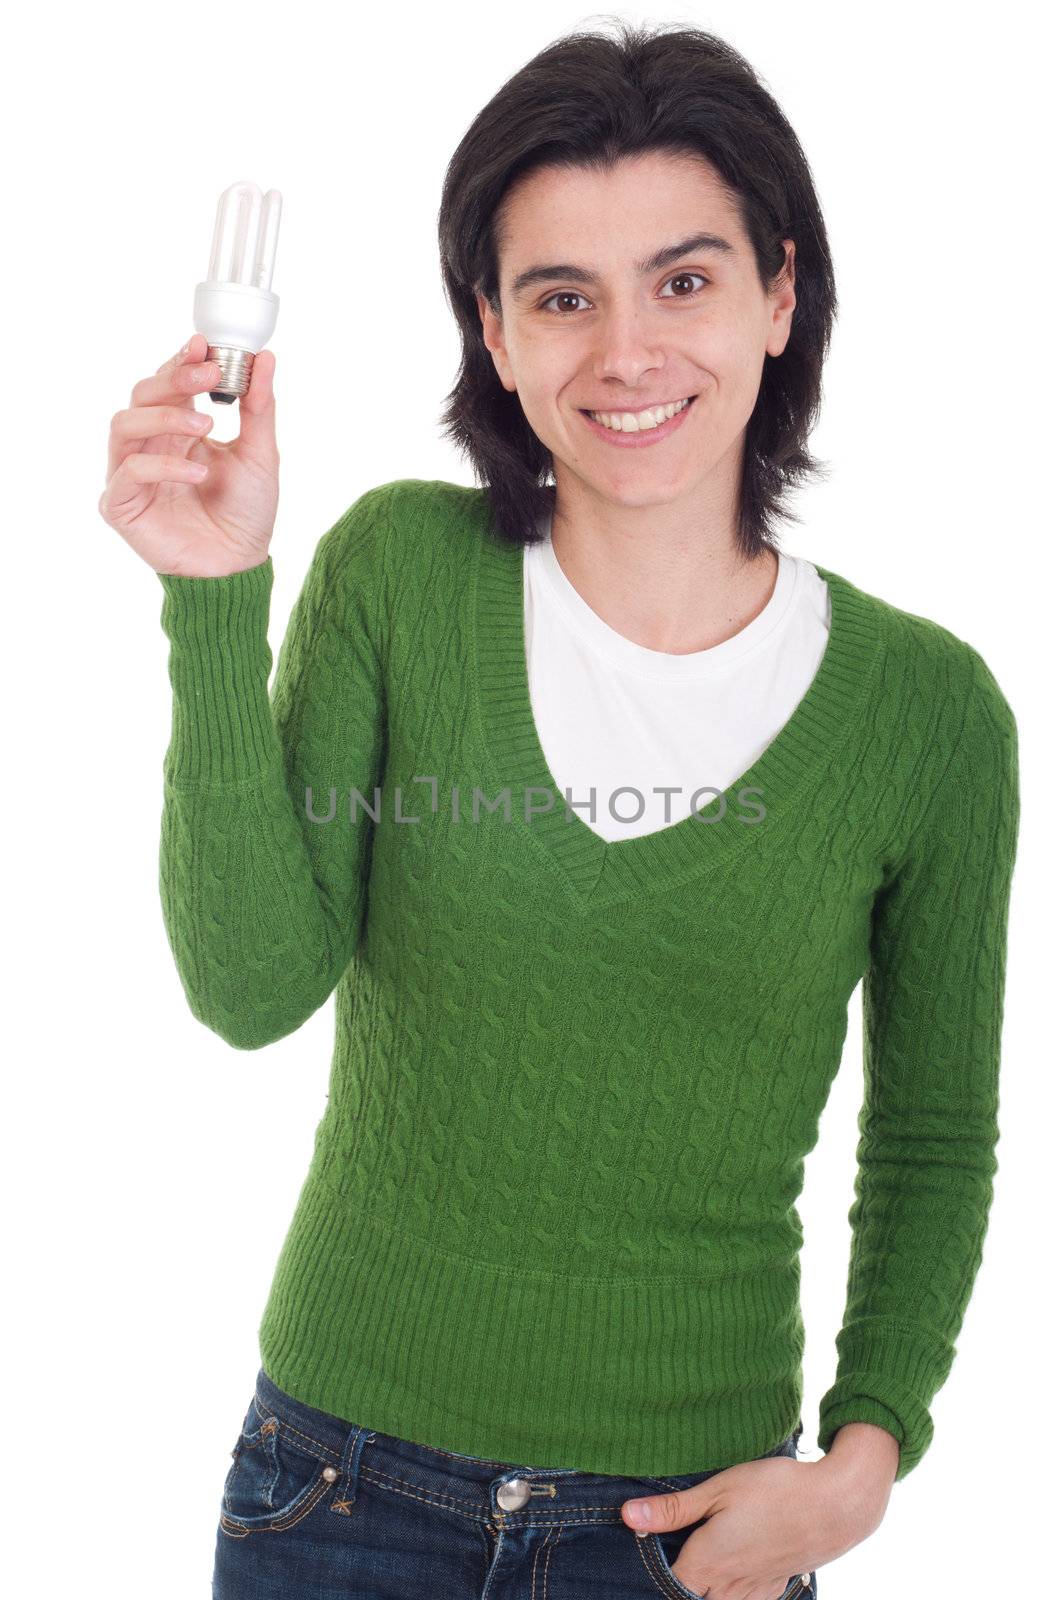 smiling casual woman holding a energy-saving lightbulb isolated on white background